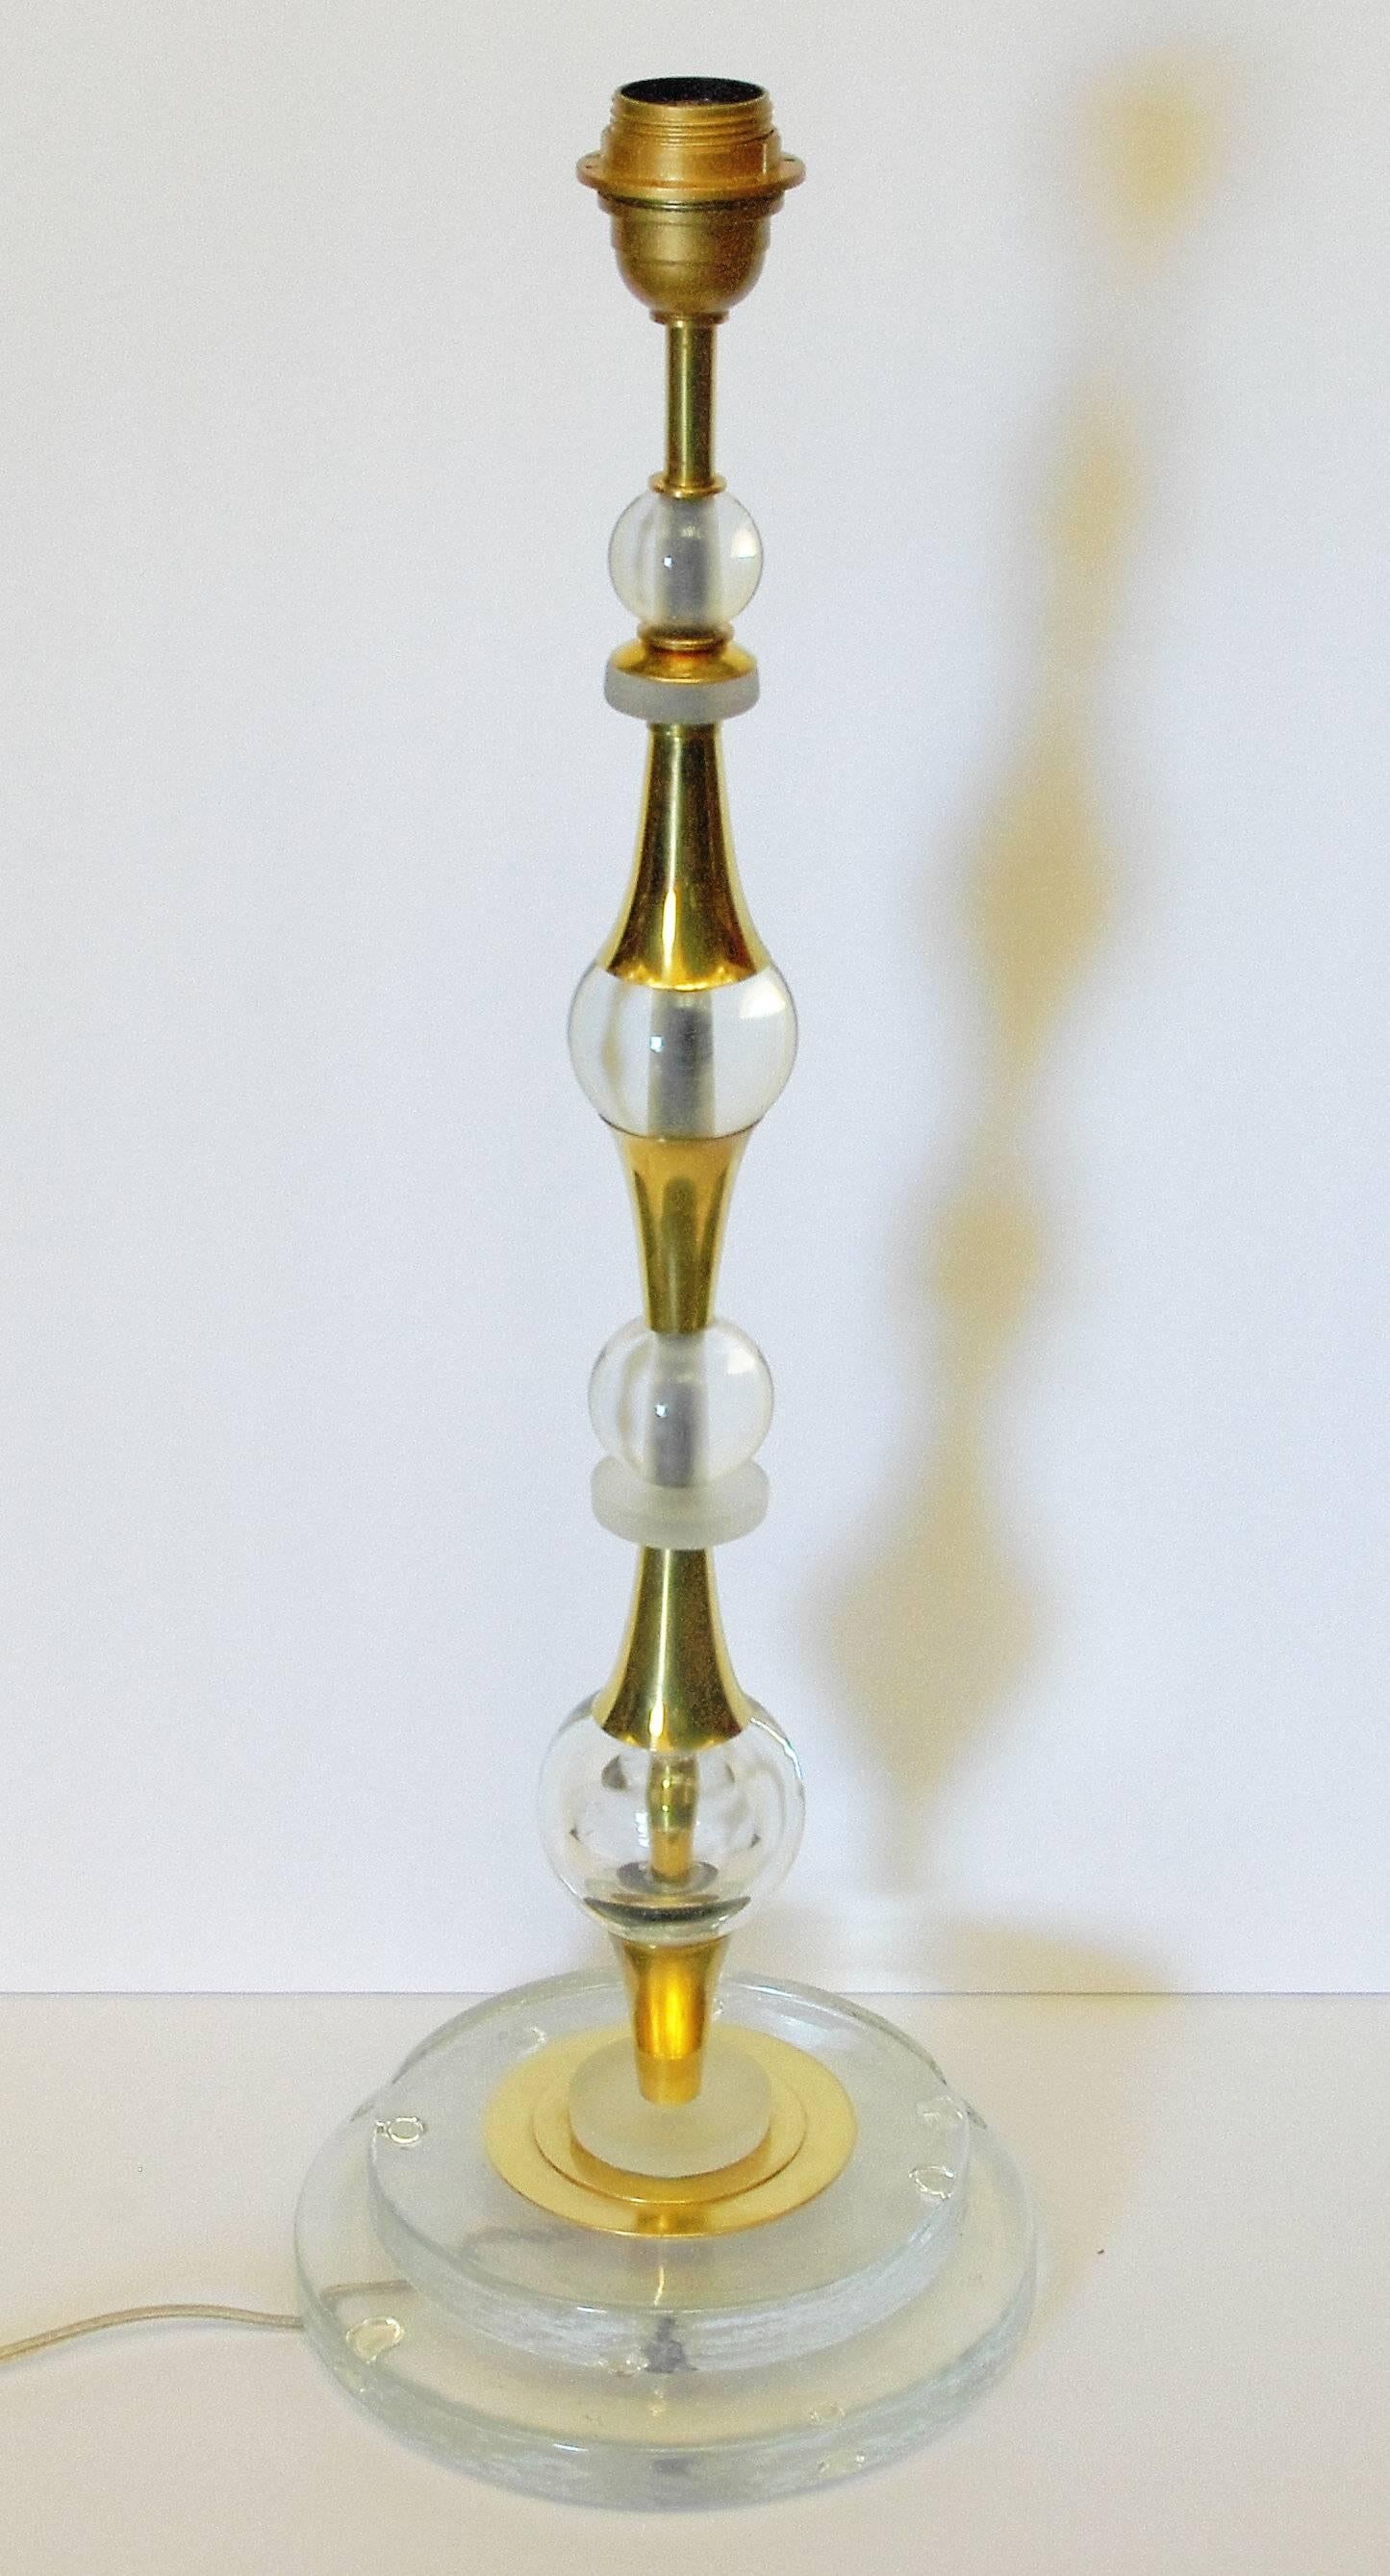 Vintage Italian Murano glass table lamp with transparent Murano glasses mounted on polished brass frame / In the style of Ettore Sottsass / Made in Italy, circa 1980s
1 light / E26 or E27 type / max 60W 
Measures: Height 25.5 inches / Diameter 8.5